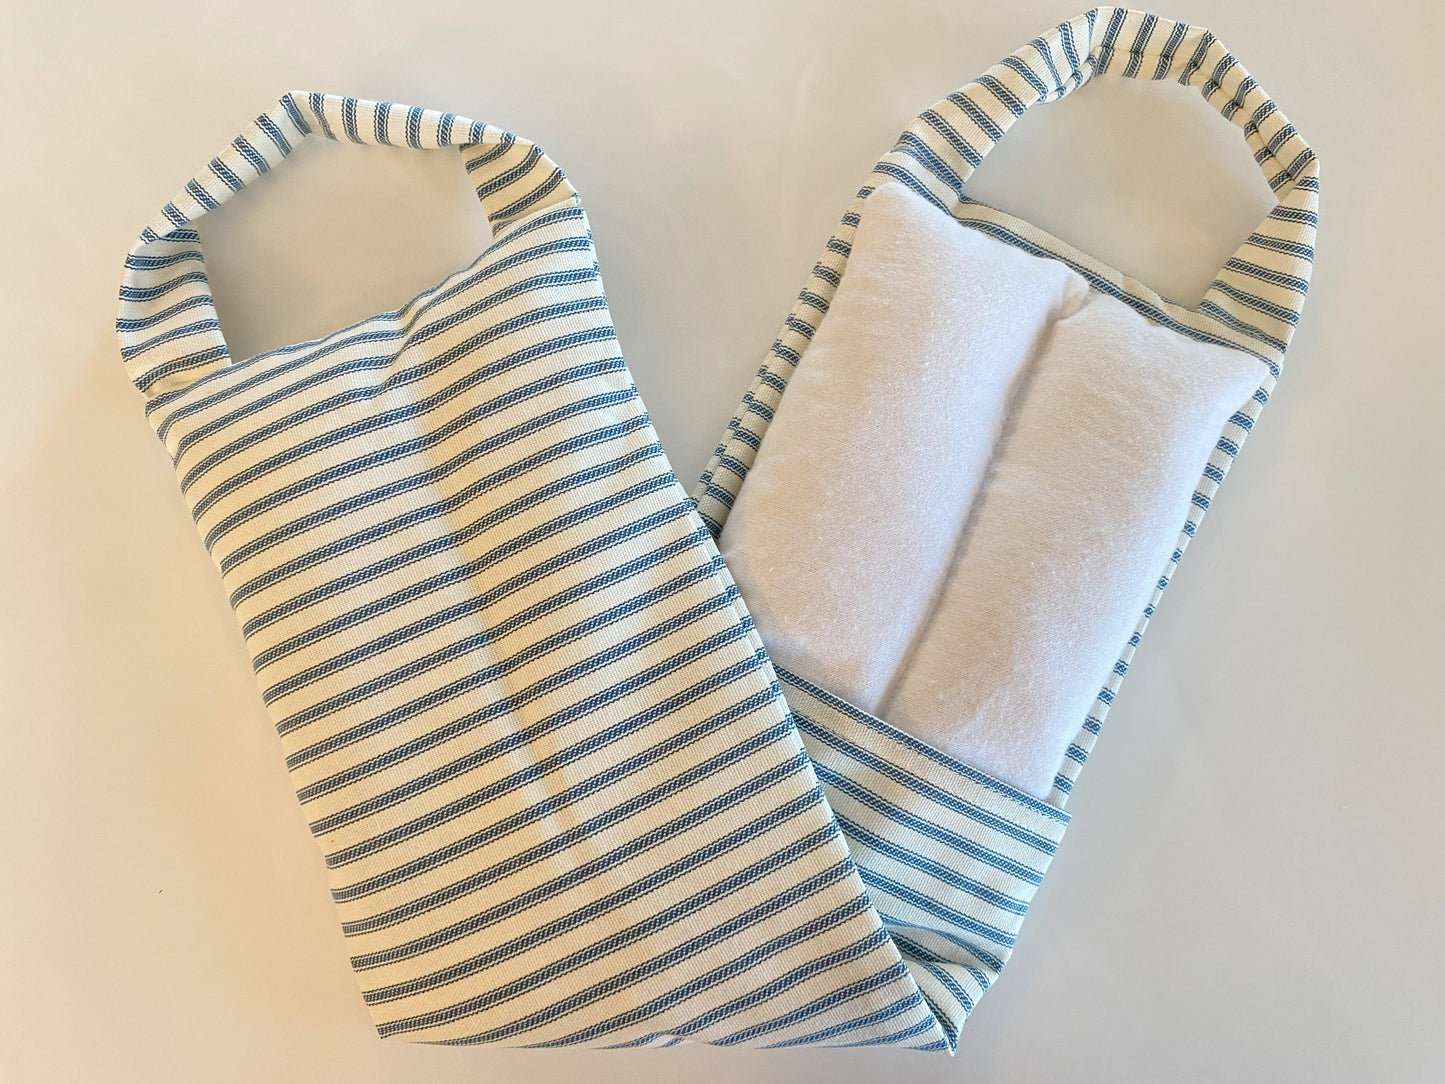 Washable Microwavable Rice Bag with Handles l Comfort Therapy Pack l Neck Wrap l Stripes